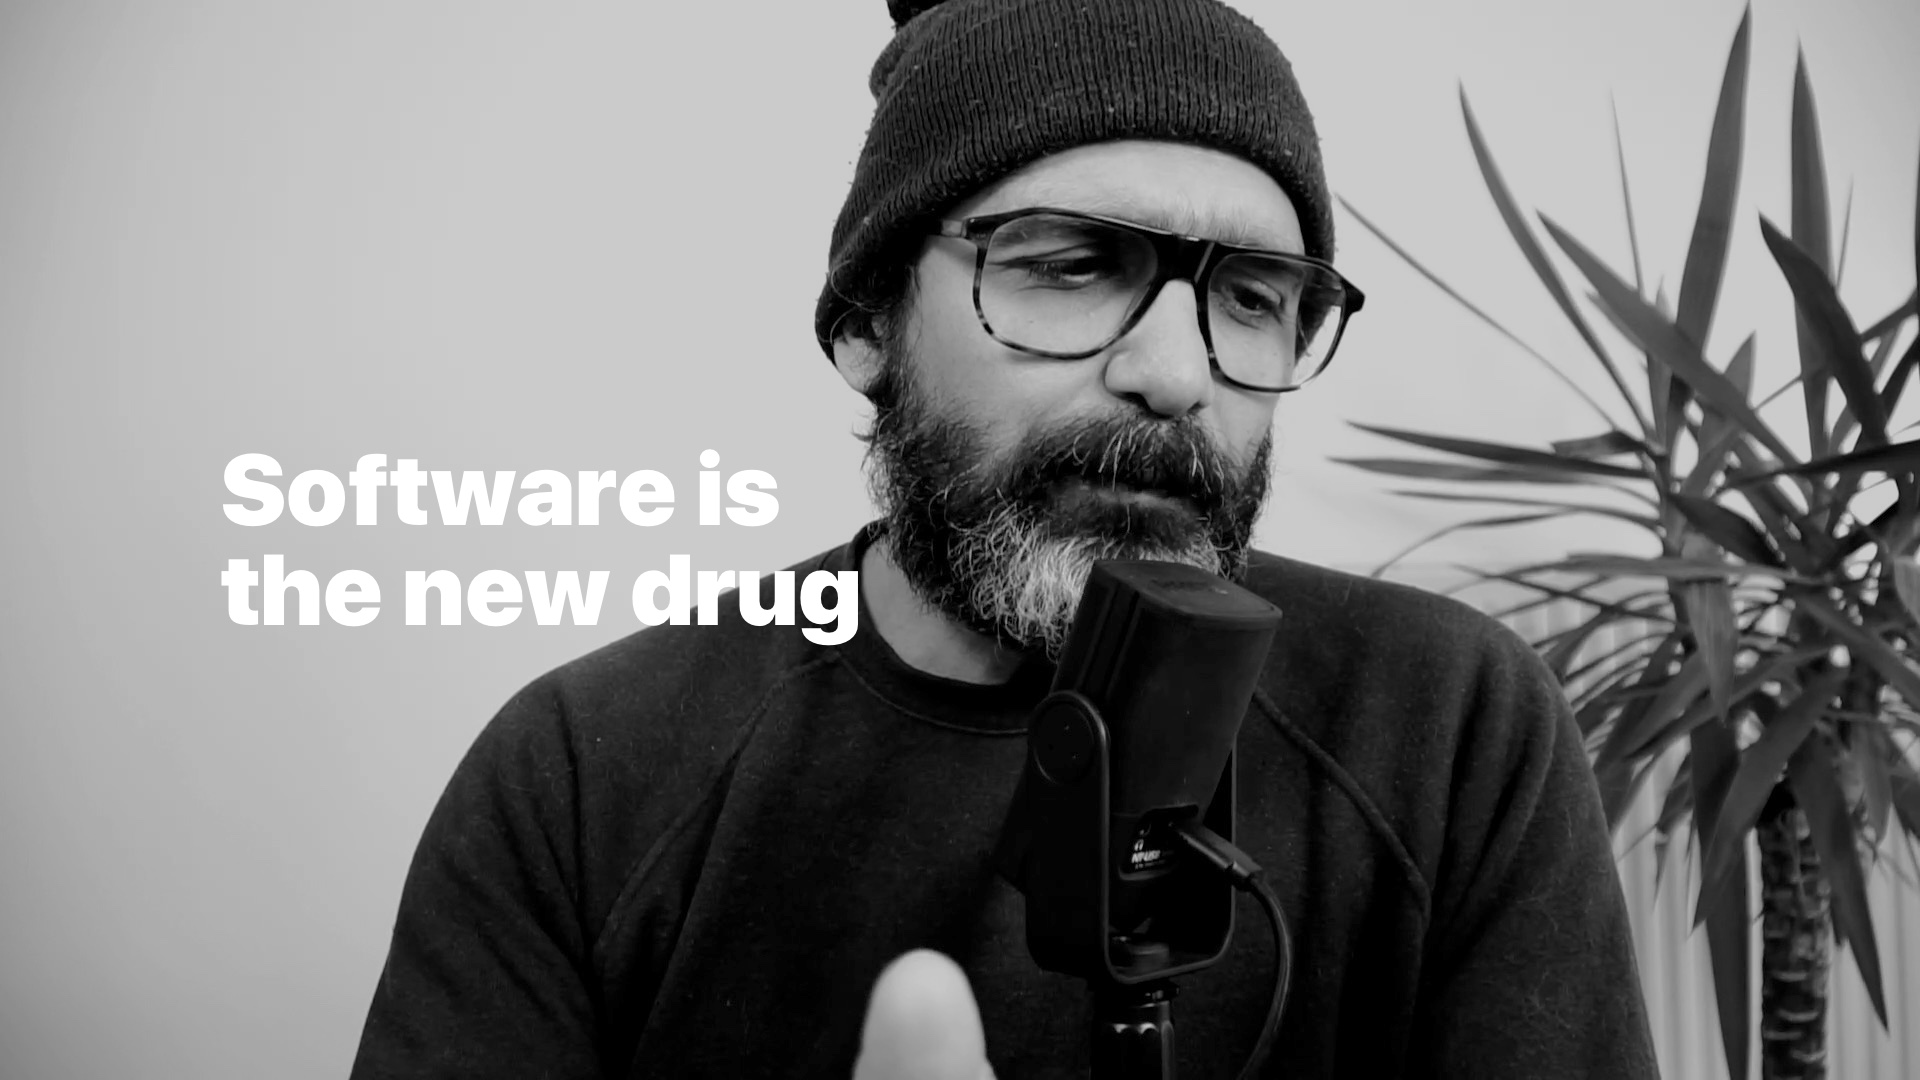 Software is the new drug